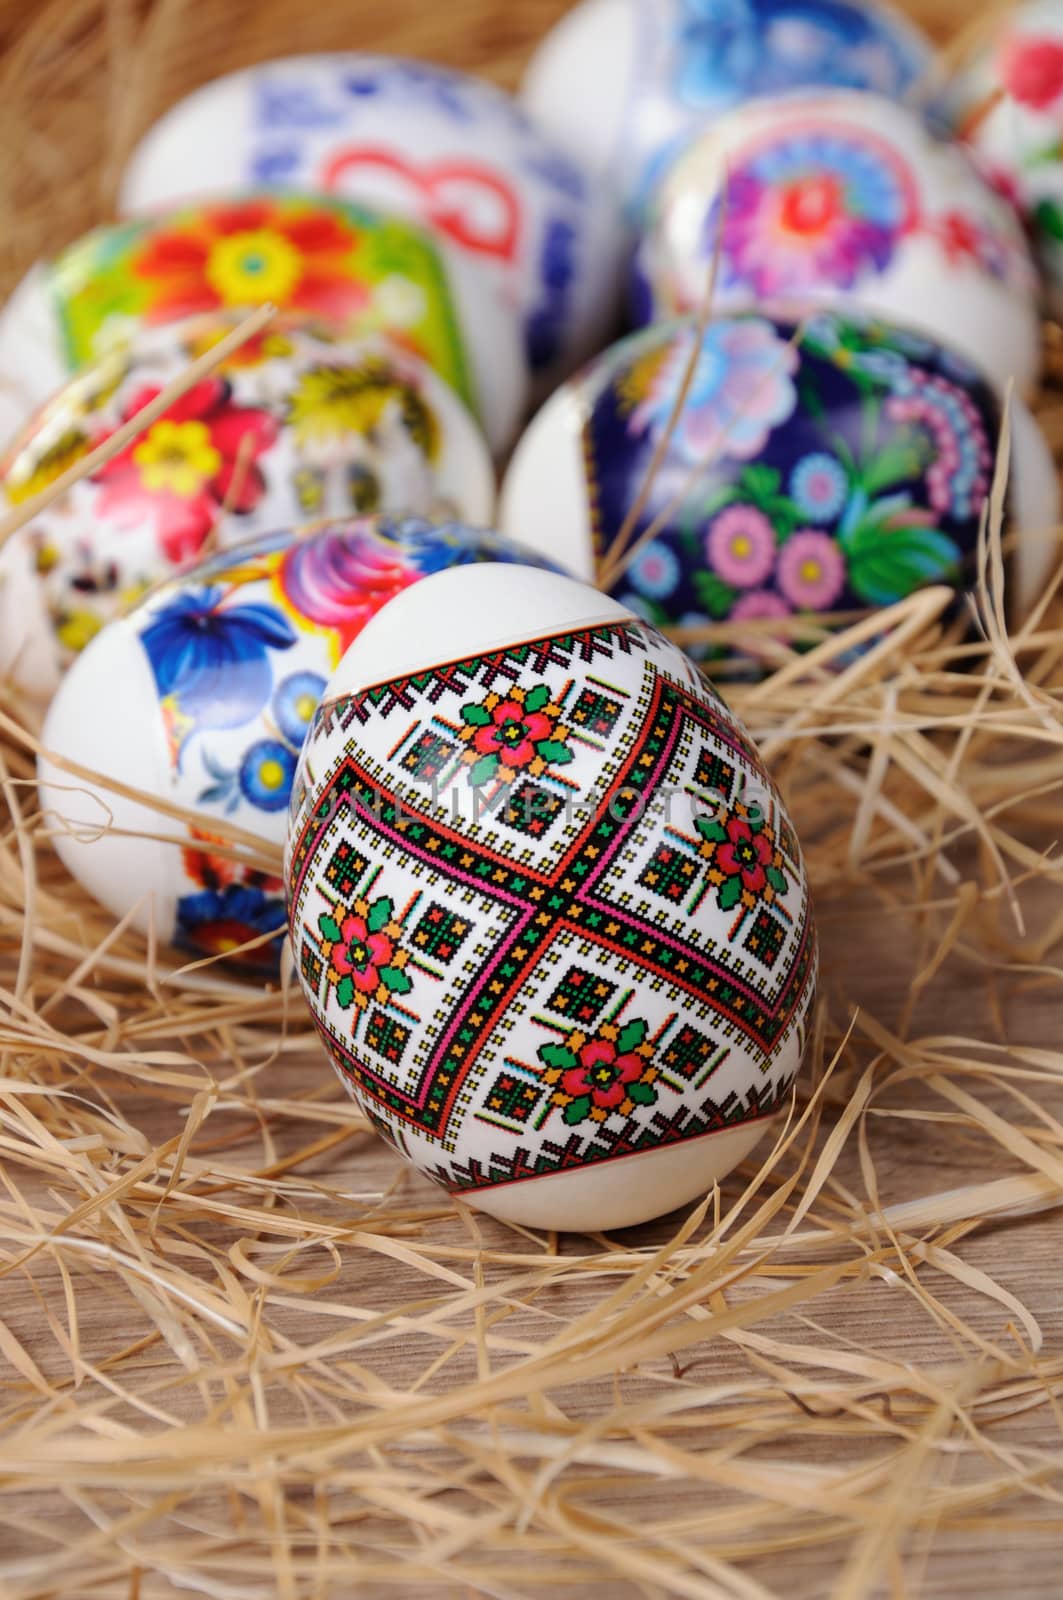 A variety of painted Easter eggs on the table in the hay